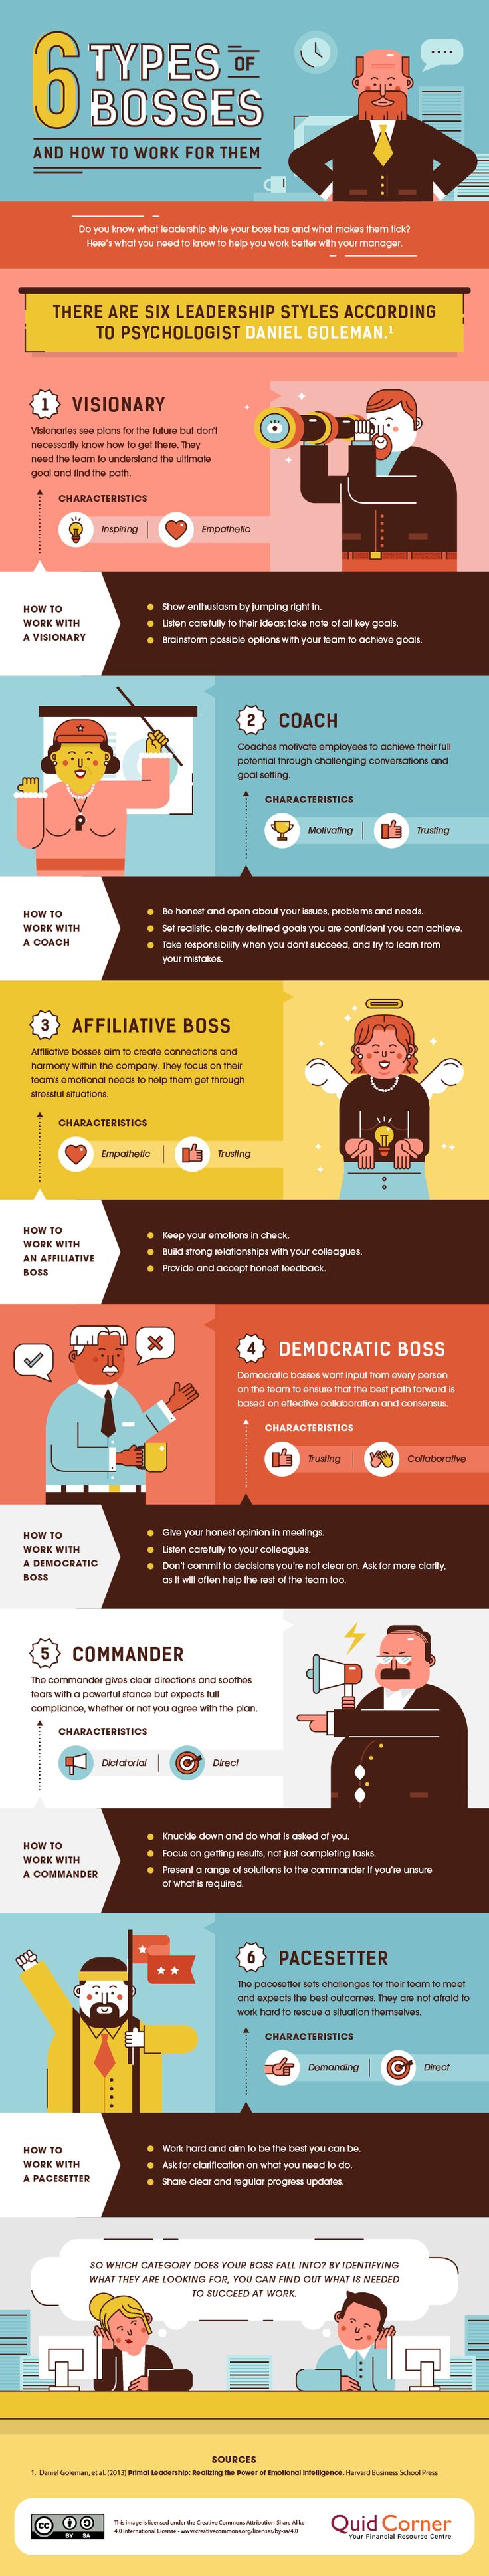 Infographic-The-6-Types-of-Bosses-and-How-to Infographic : The 6 Types of Bosses (and How to Work For Them) [INFOGRAPHIC